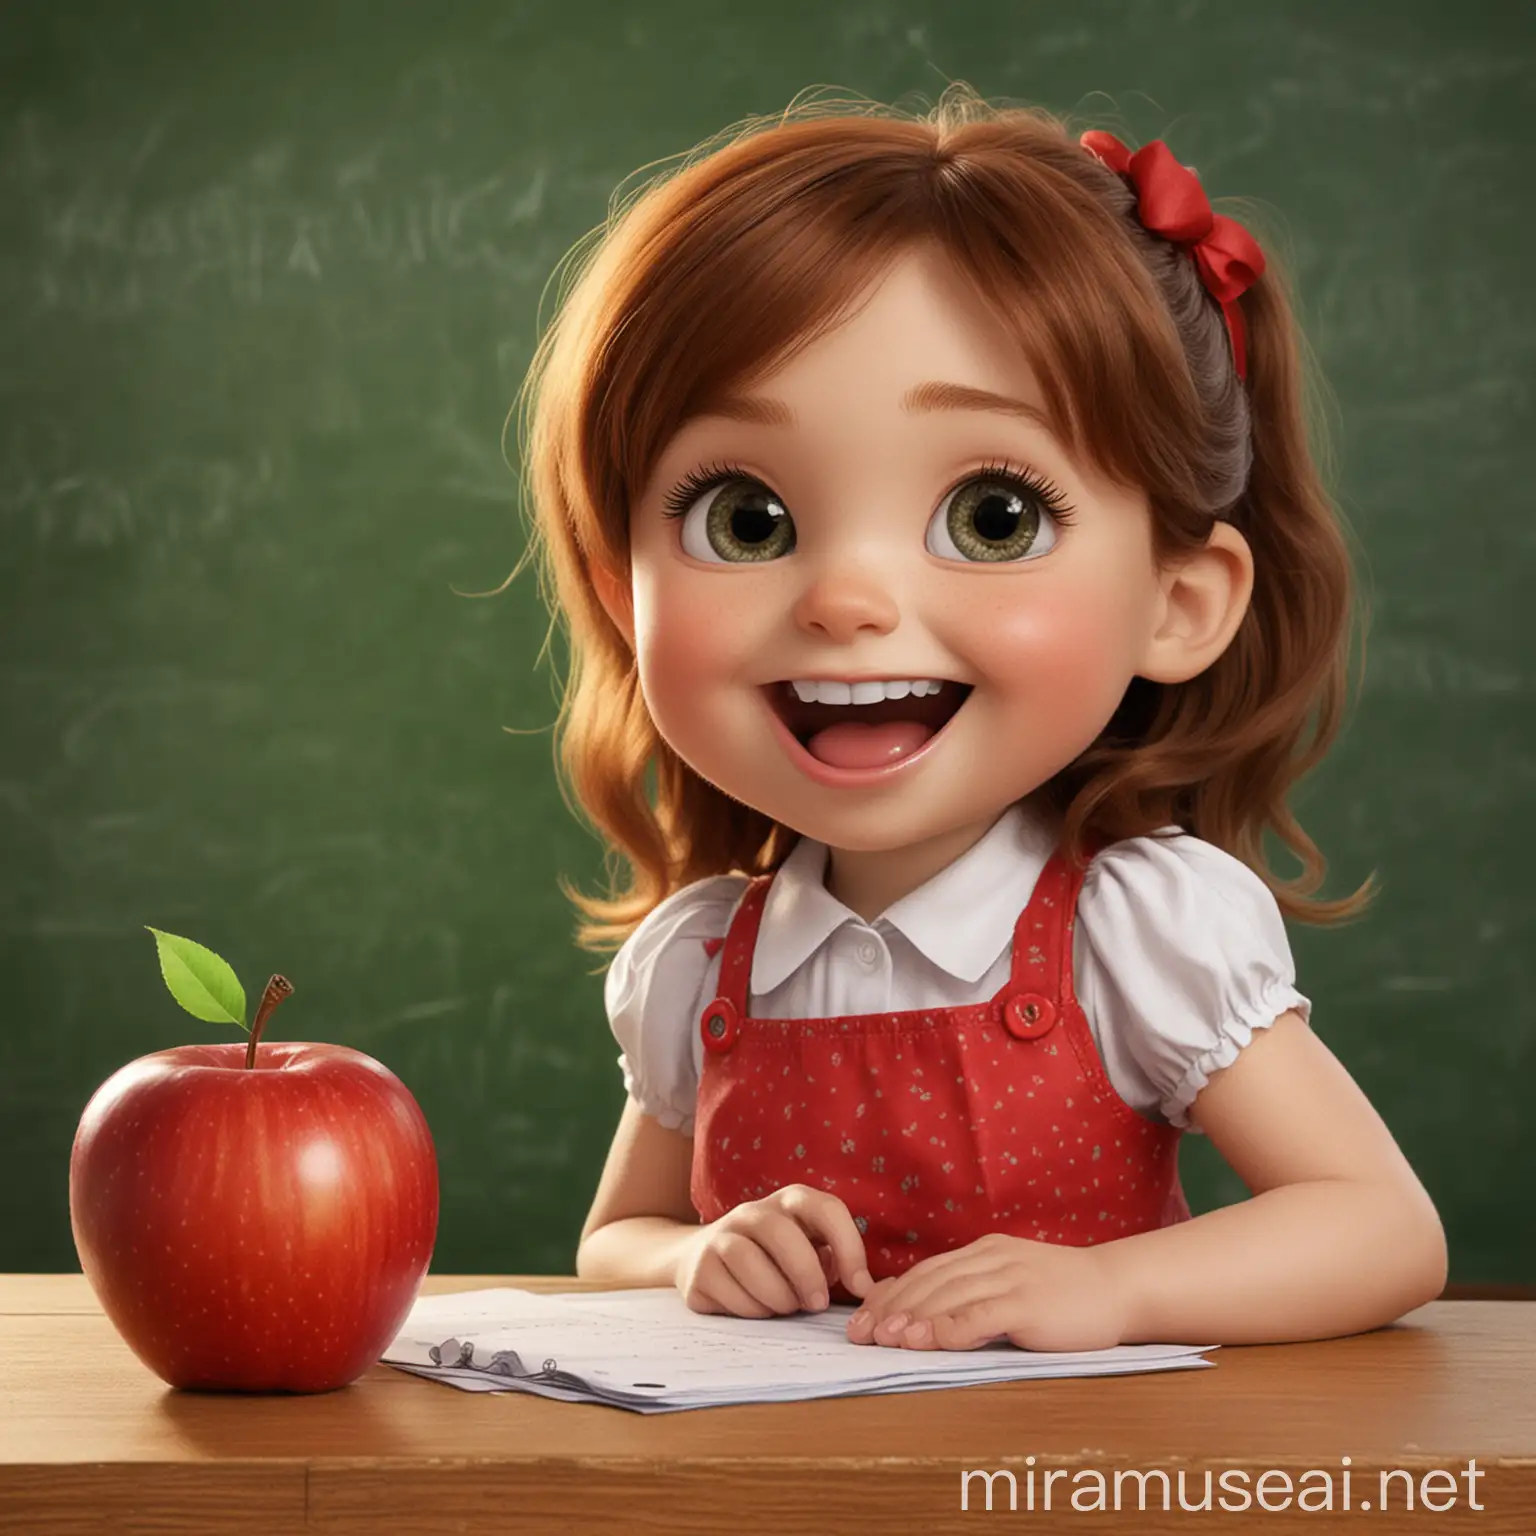 Enthusiastic Amy Learns Letter A with a Big Red Apple